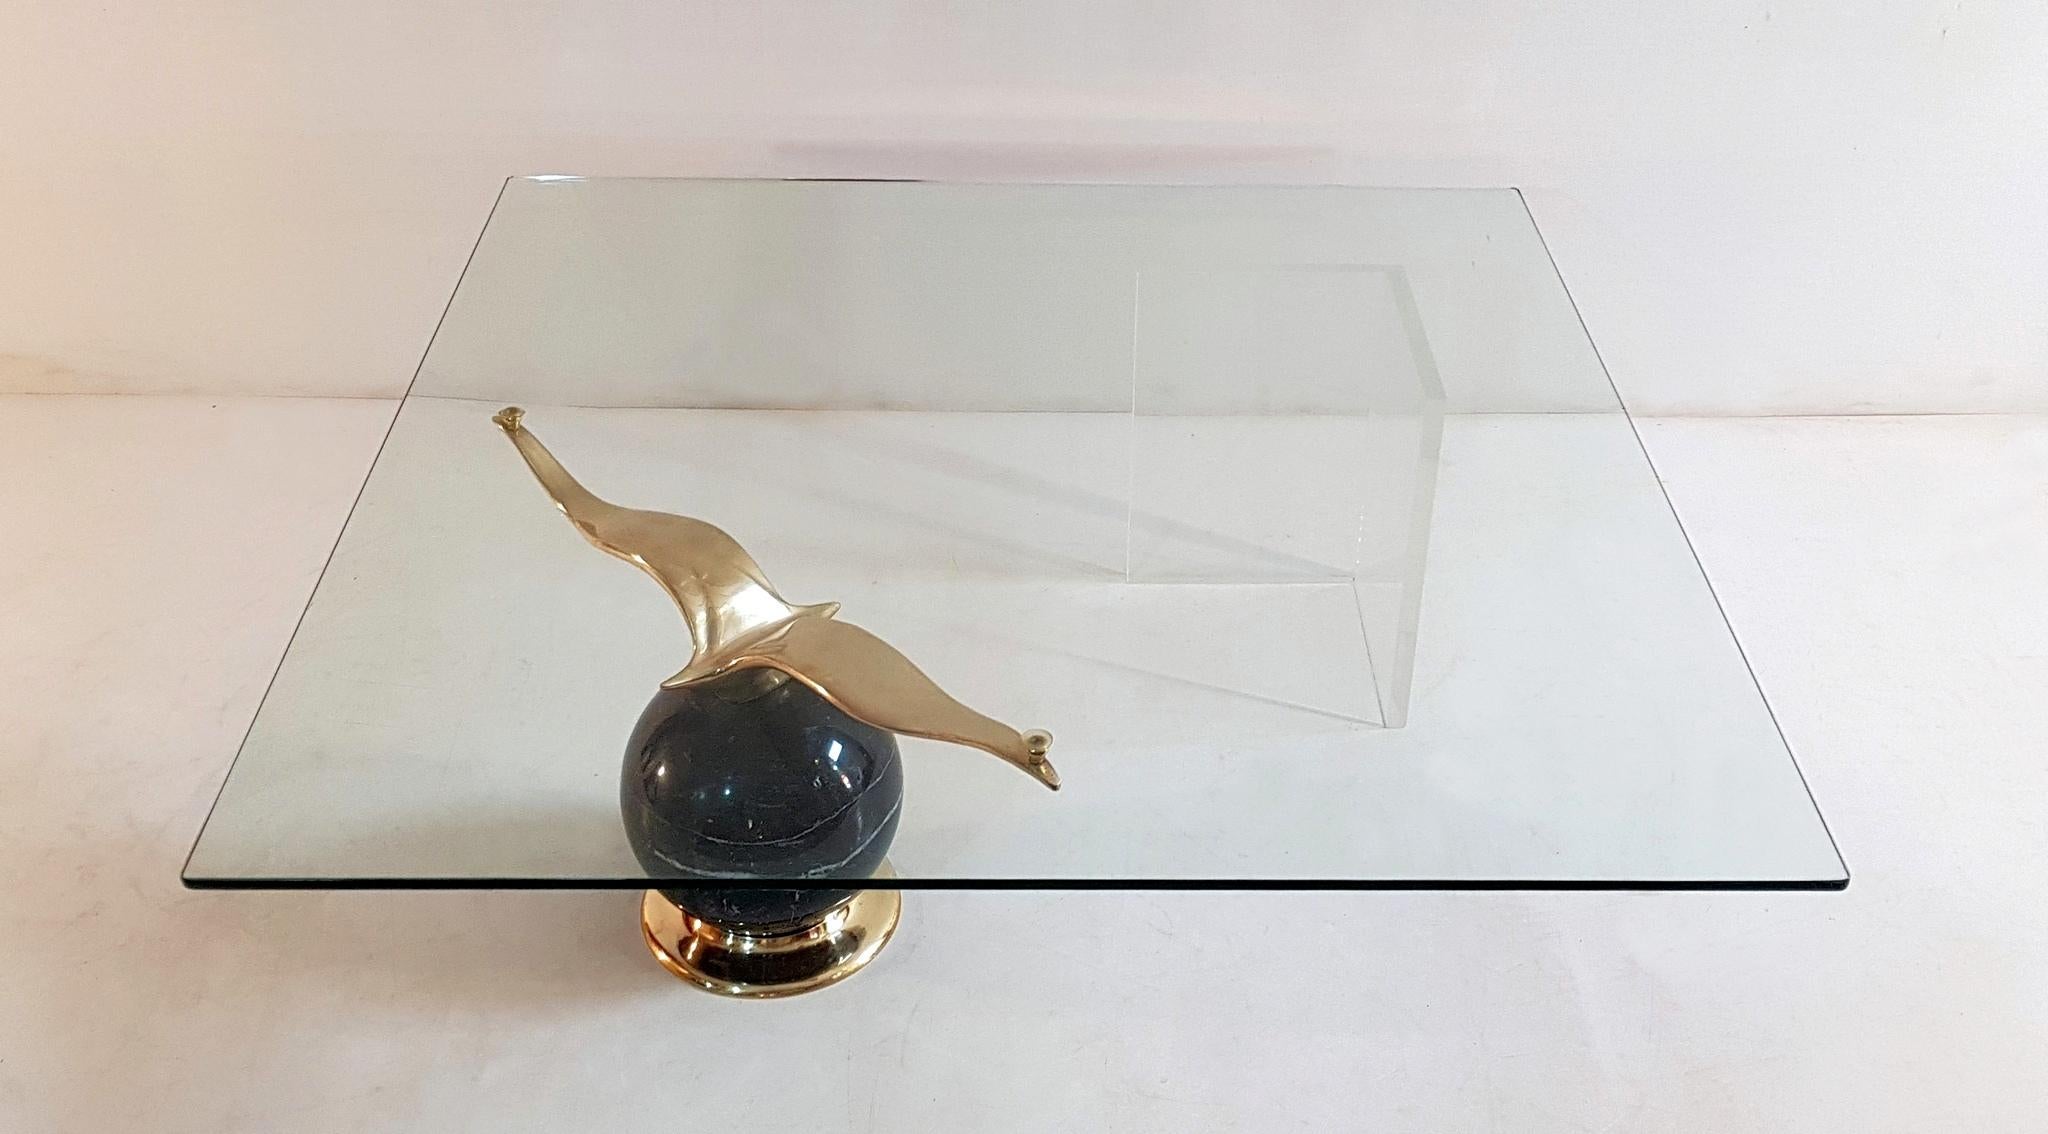 Spectacular square glass coffee table resting on a large bronze seagull sitting on a large ball in Madagaskar marble. On the other side there is a corner made of Lucite which makes it look as though the top is resting only on one side almost.